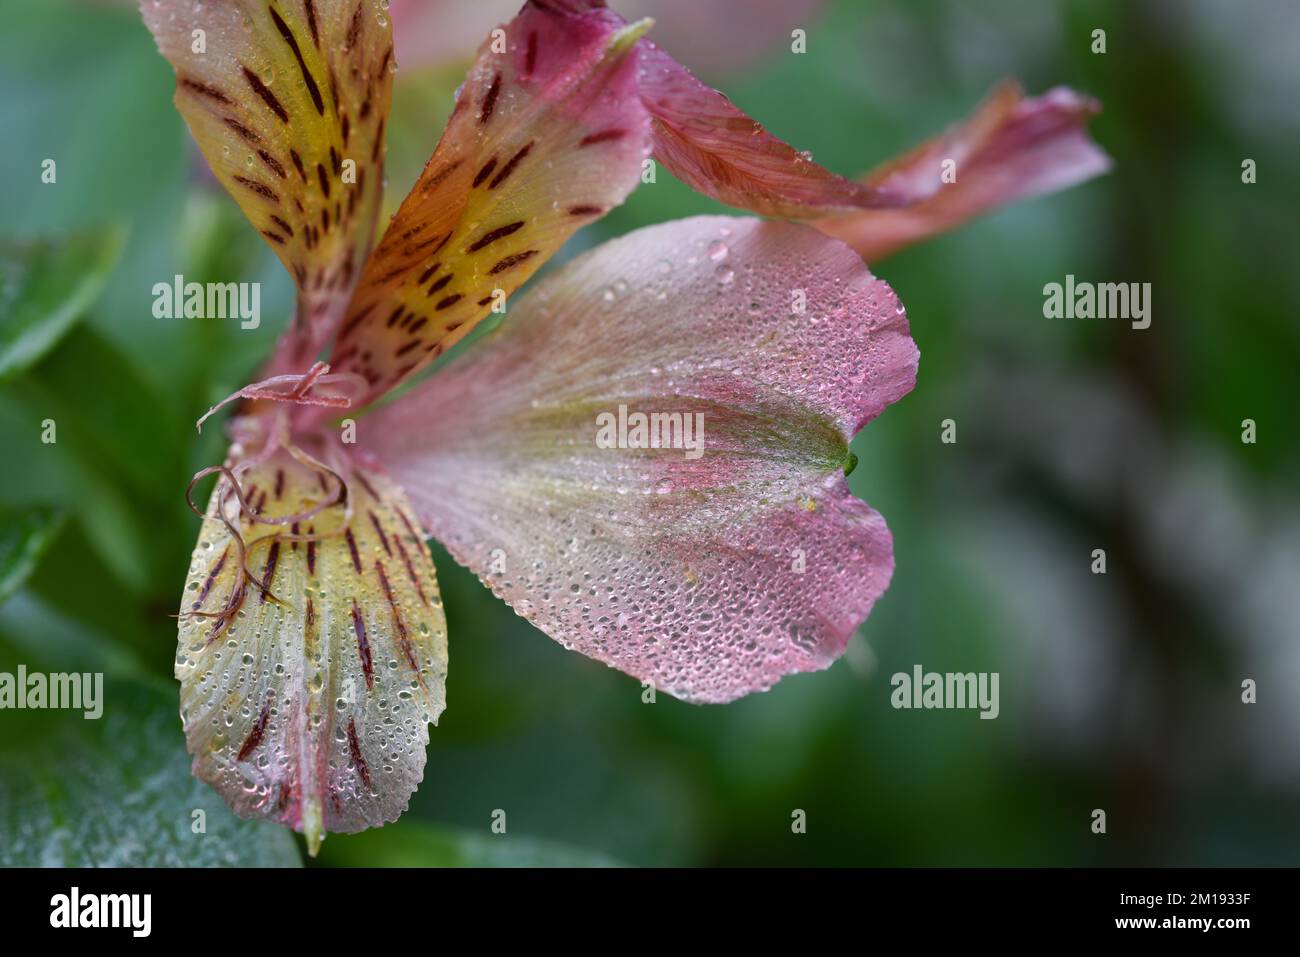 Frosty morning droplets on an Alstroemeria plant Stock Photo